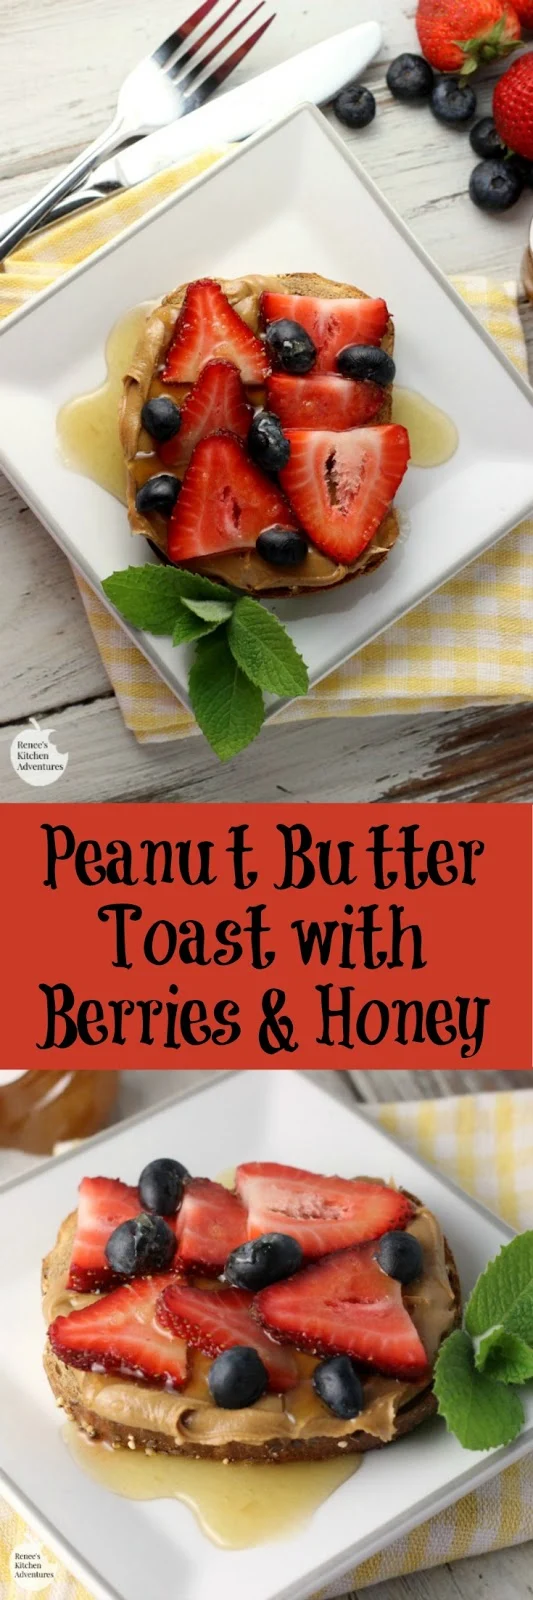 Peanut Butter Toast with Berries and Honey | Renee's Kitchen Adventures - quick and easy recipe for a toast that makes a great snack, quick breakfast, or dessert that is good-for-you! #ad #HarvestBlends